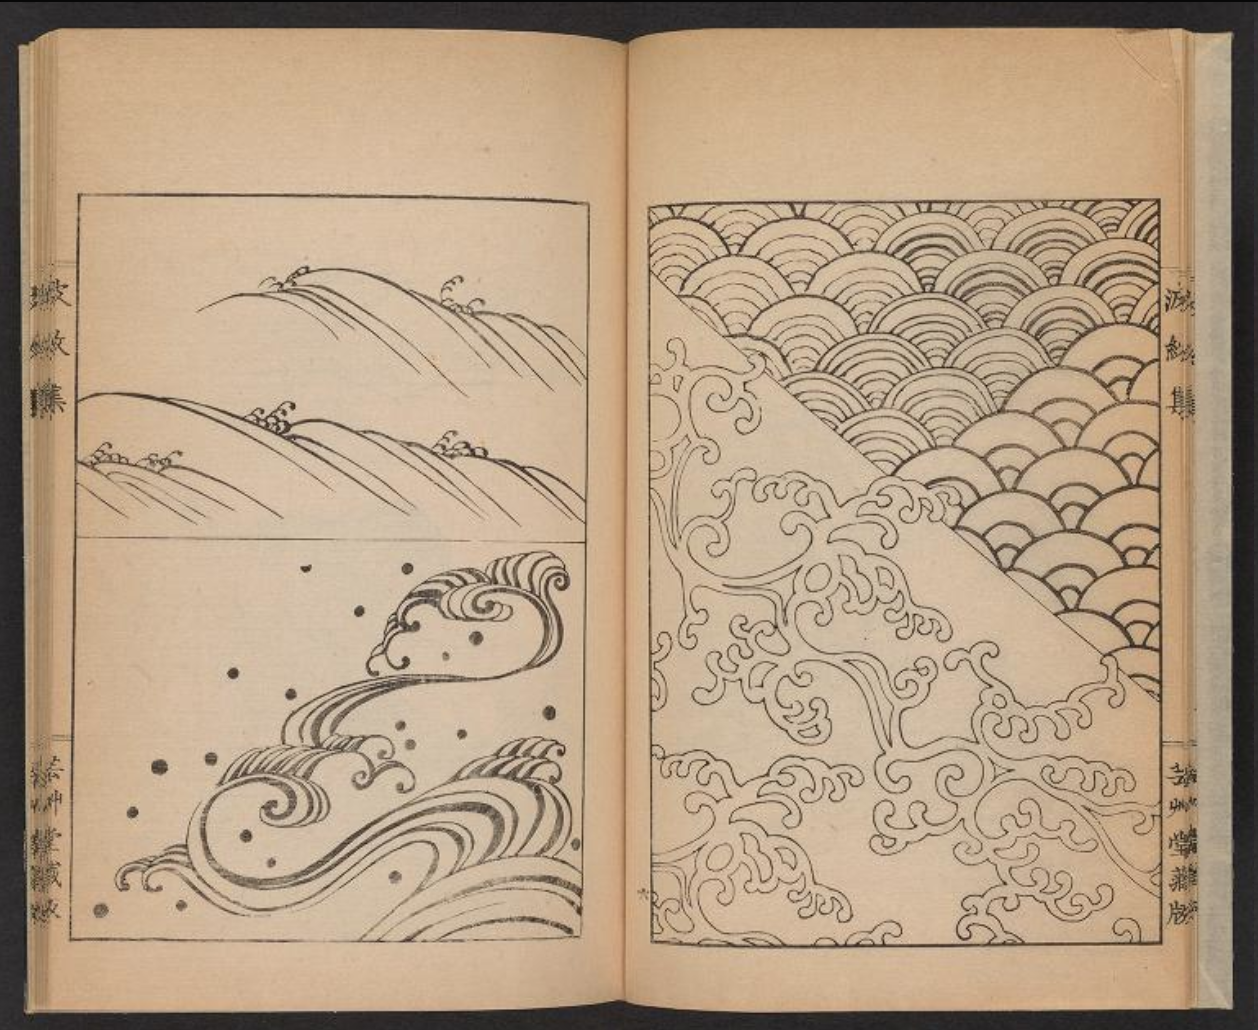 You Can Now Download These Traditional Japanese Wave Drawings For Free